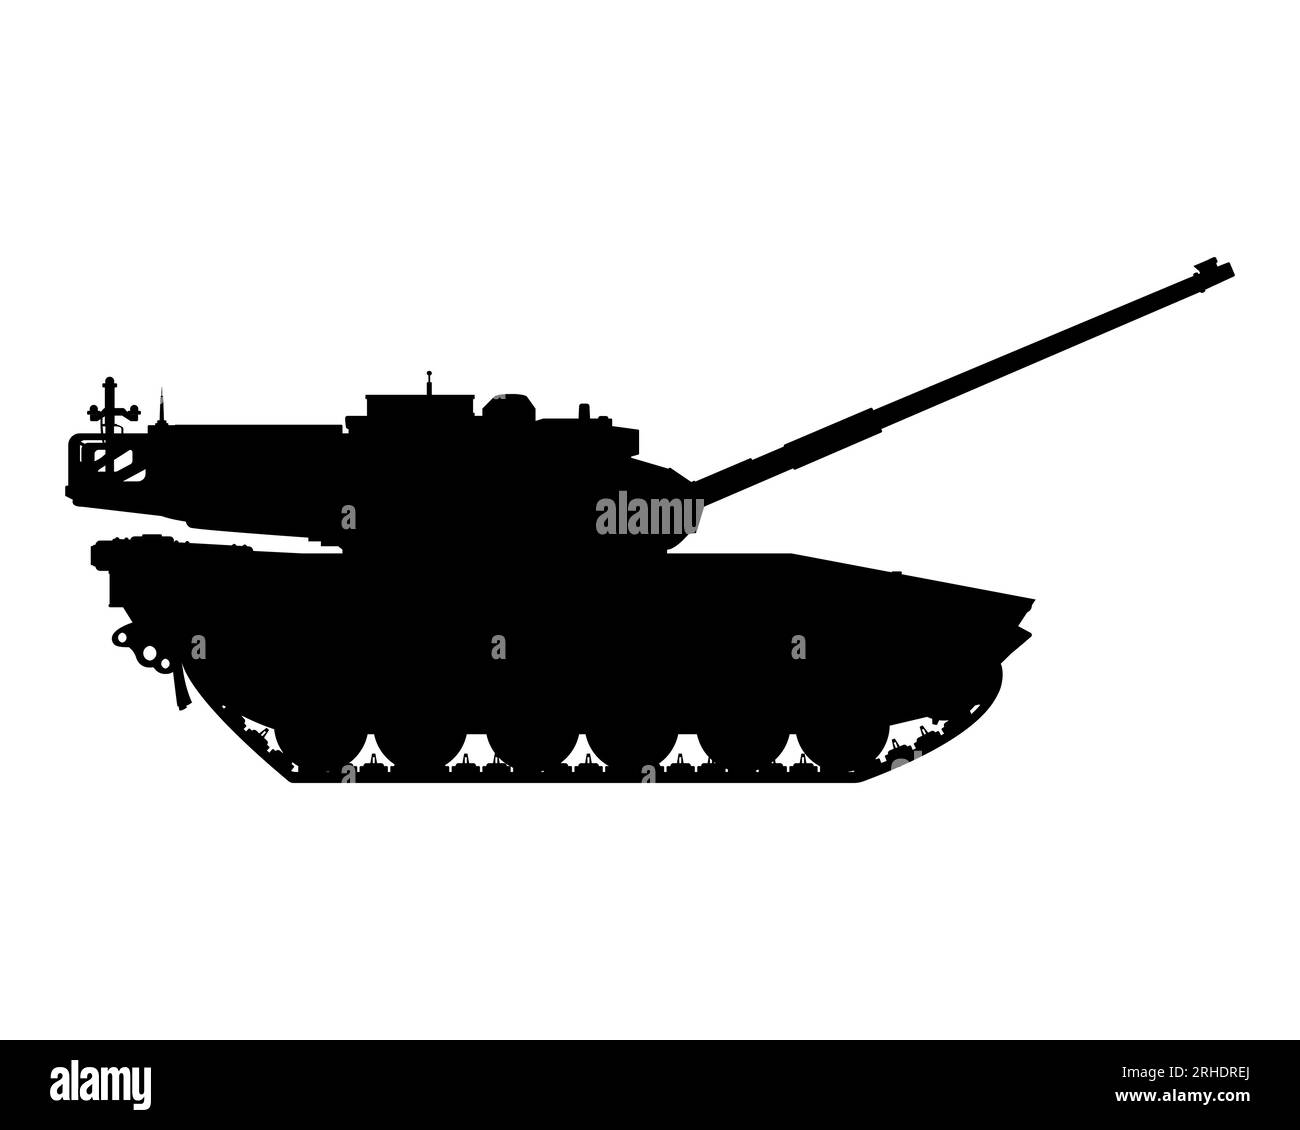 Main battle tank silhouette. Raised barrel. Armored military vehicle. Vector illustration isolated on white background. Stock Vector